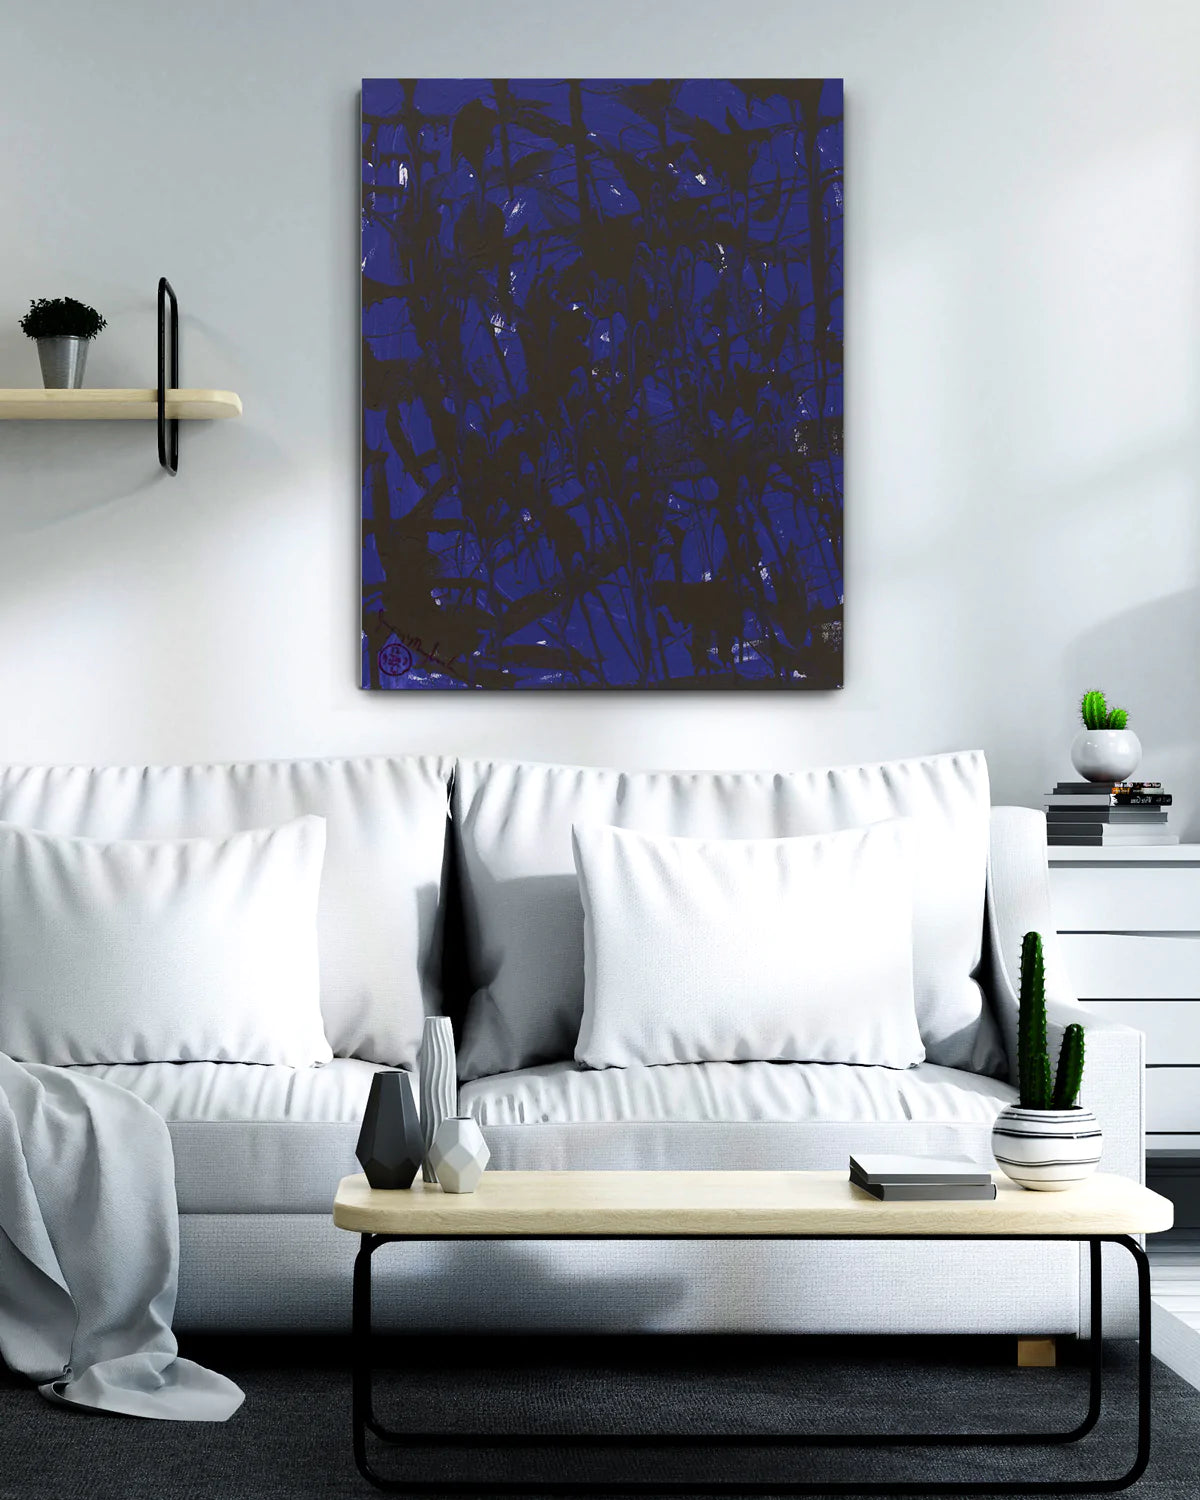 Blue Nights by Jumper Maybach®
From The Pride Series 
24" x 30"
Acrylic mixed media on canvas

Do you own a Jumper Maybach, yet? ®
Seek LOVE, PEACE, and HAPPINESS, aBlue Nights        PNTArtworkJumper MaybachJumper Maybach